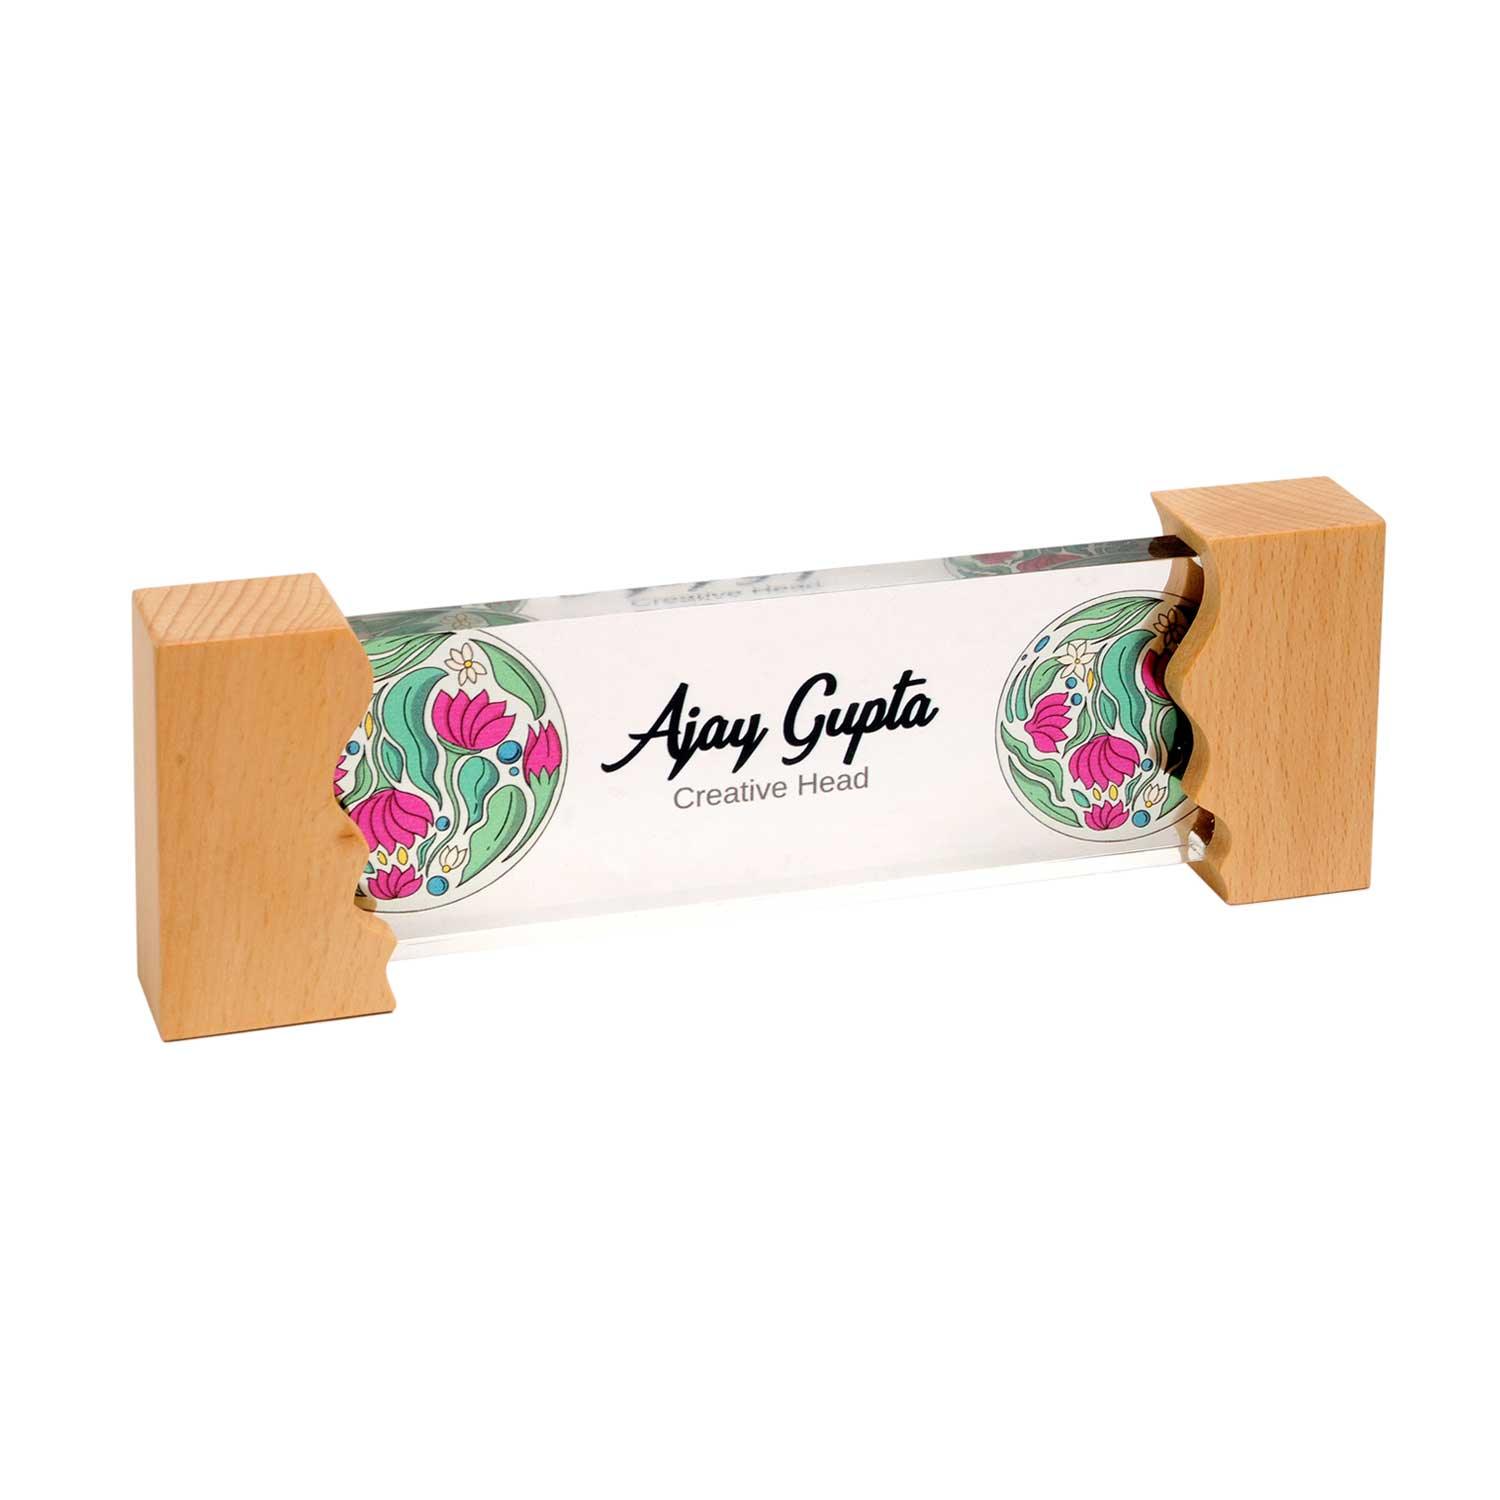 Planet Lotus Desk Name Plate with Wooden Stand - Housenama